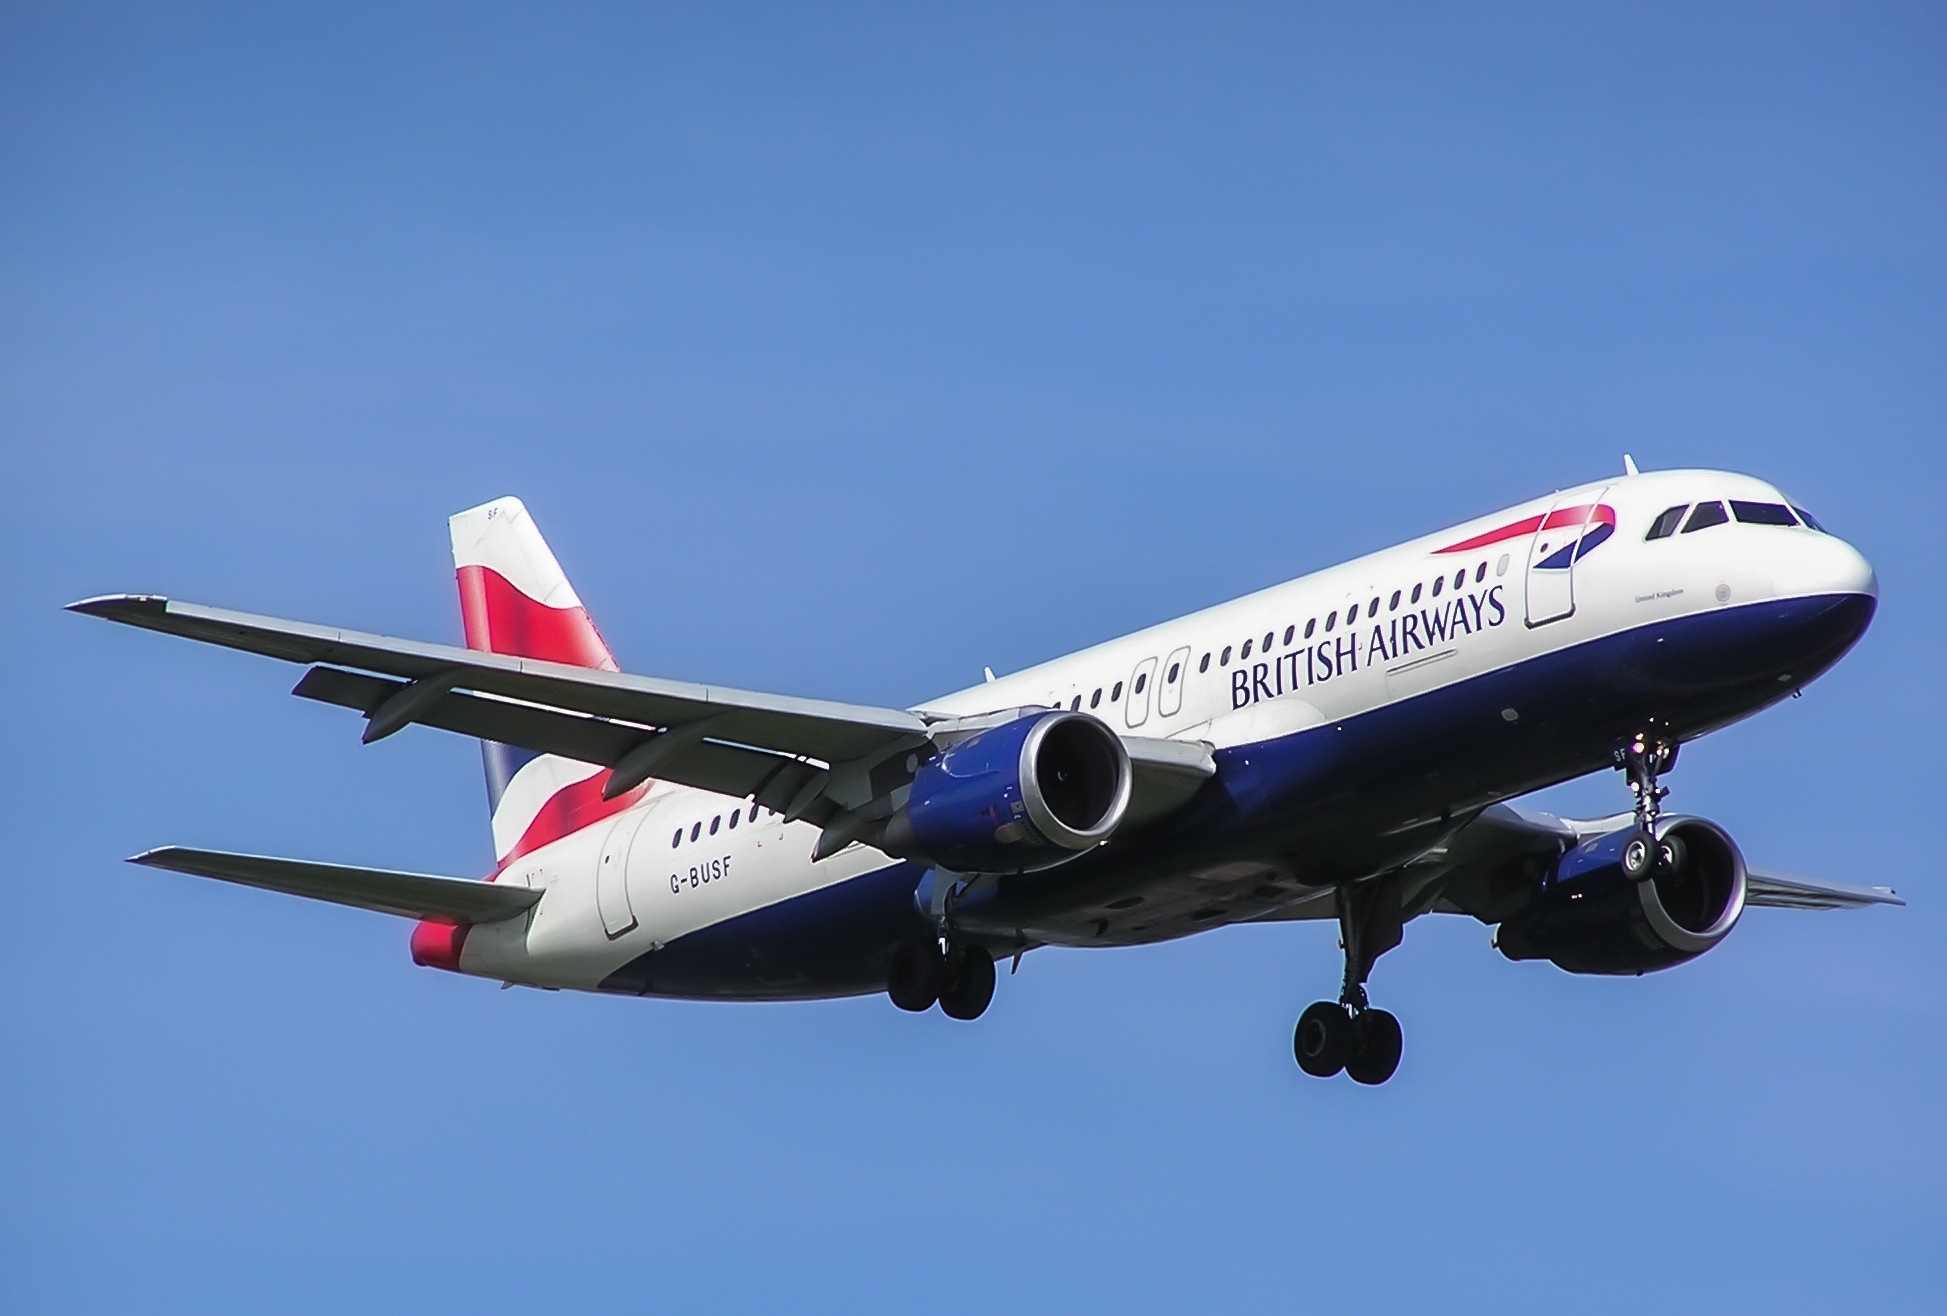 G-BUSF /GBUSF  British Airways Airbus A320 Airframe Information - AVSpotters.com